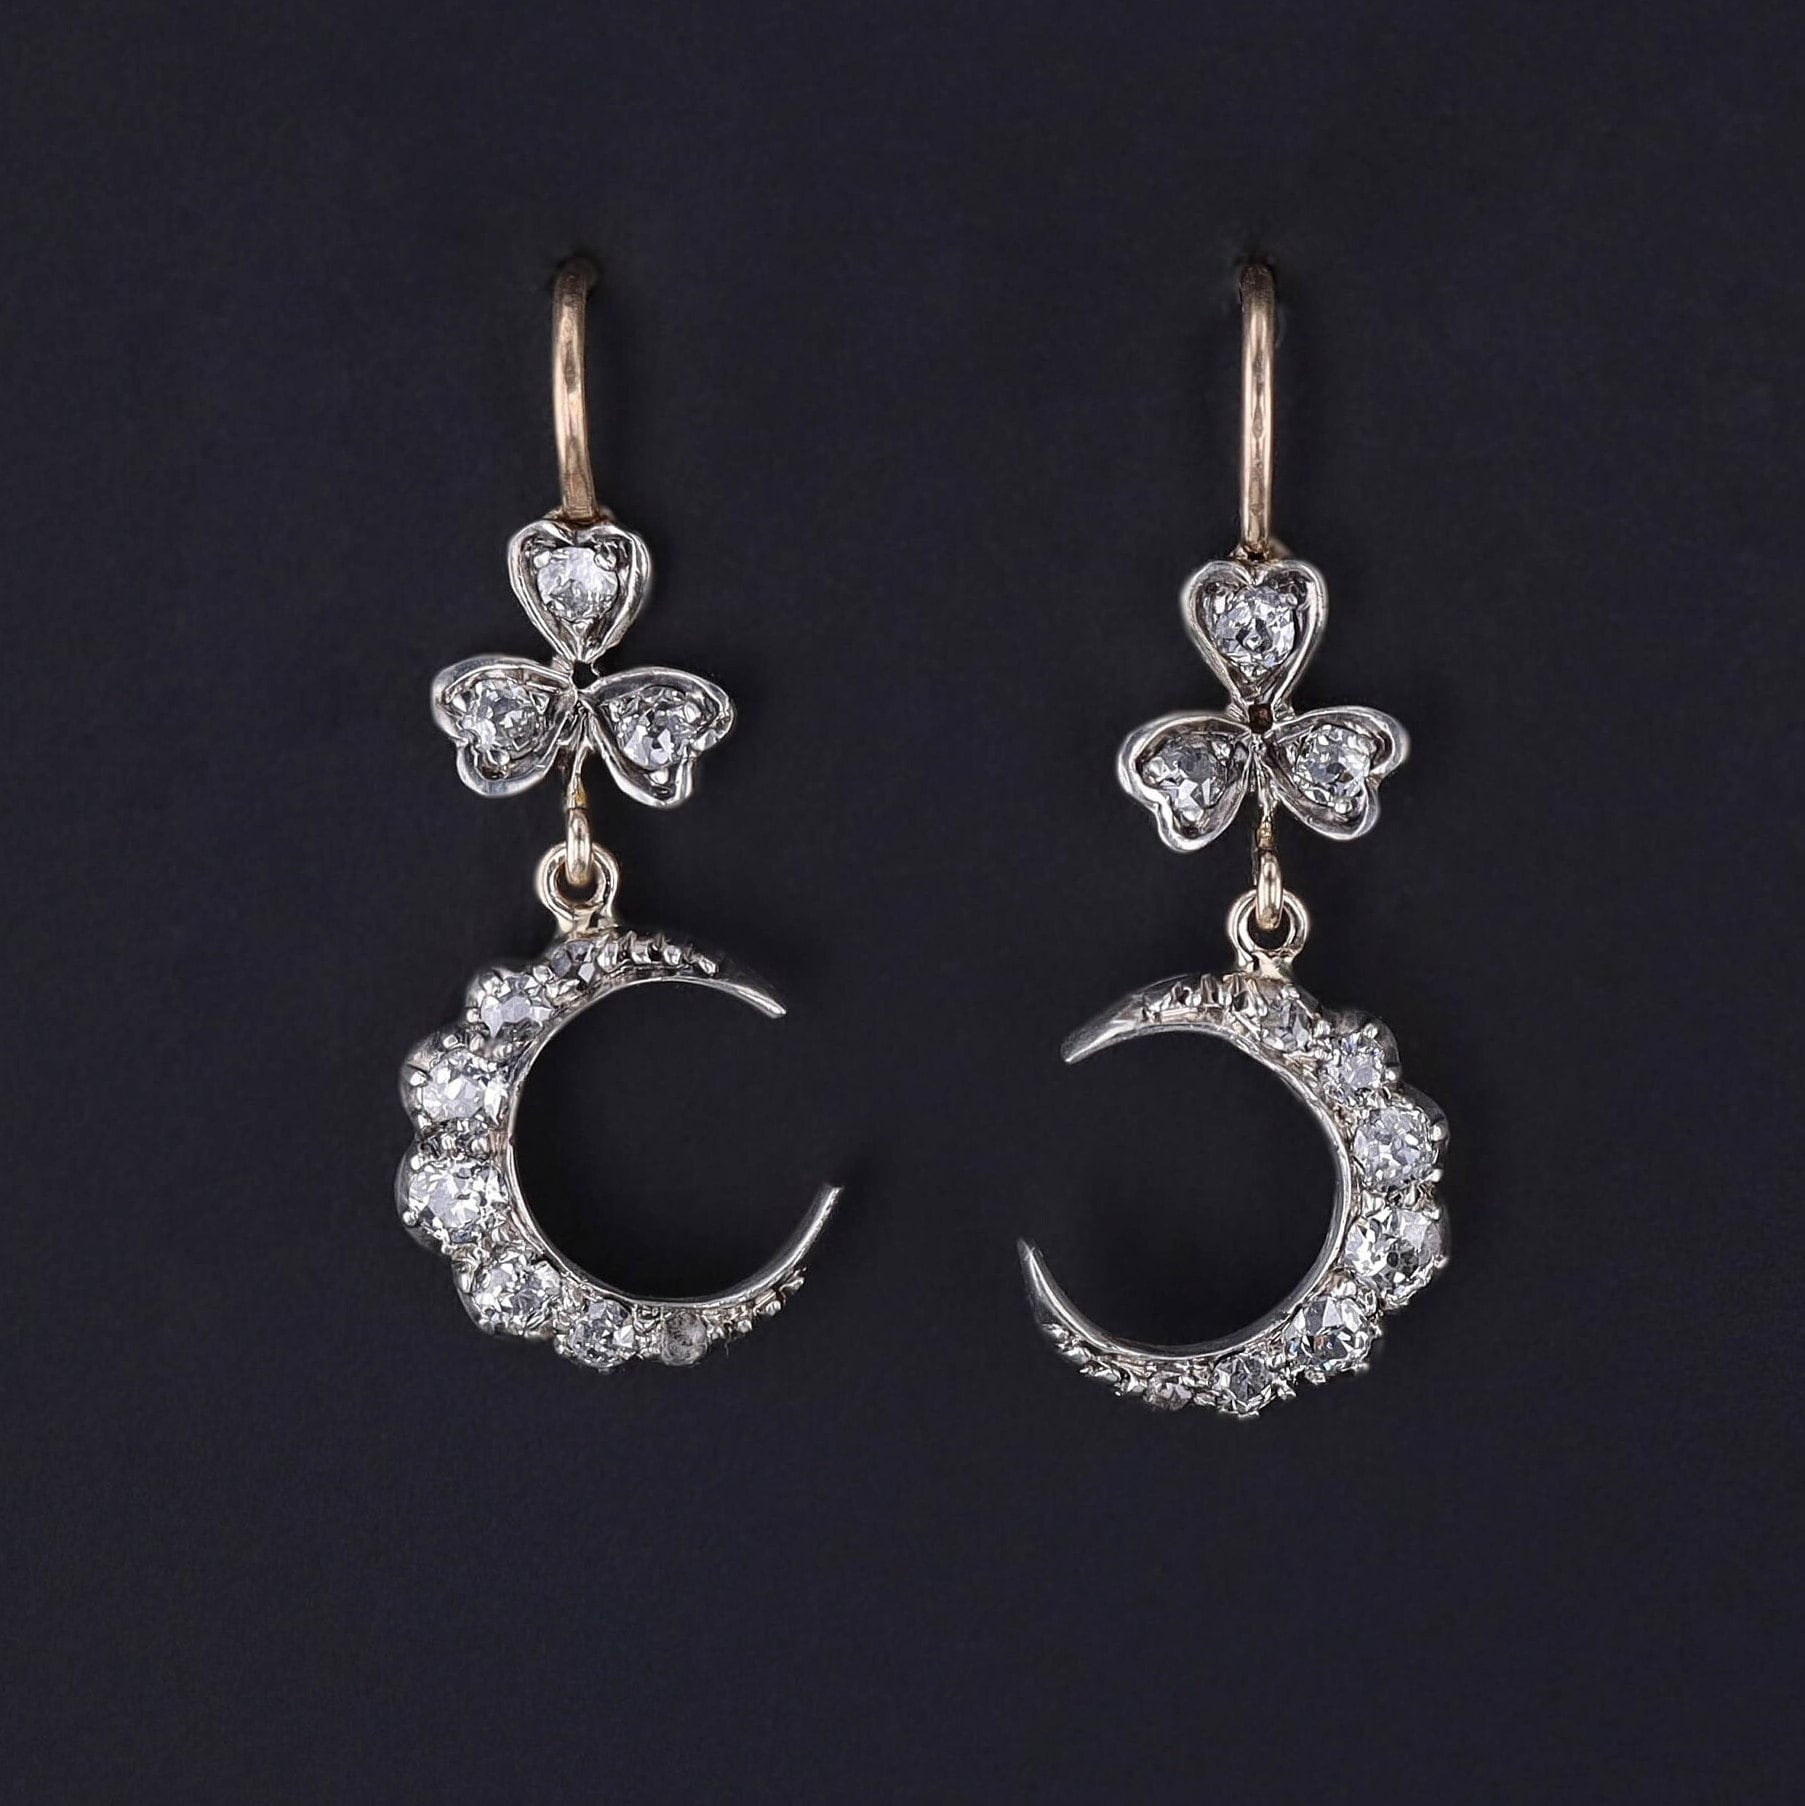 Diamond Crescent Earrings: These exquisite earrings adorned with old mine cut diamond crescents and clovers. The diamond drops are silver topped 14k and were originally antique brooch components dating to 1890. The ear wires are new additions.